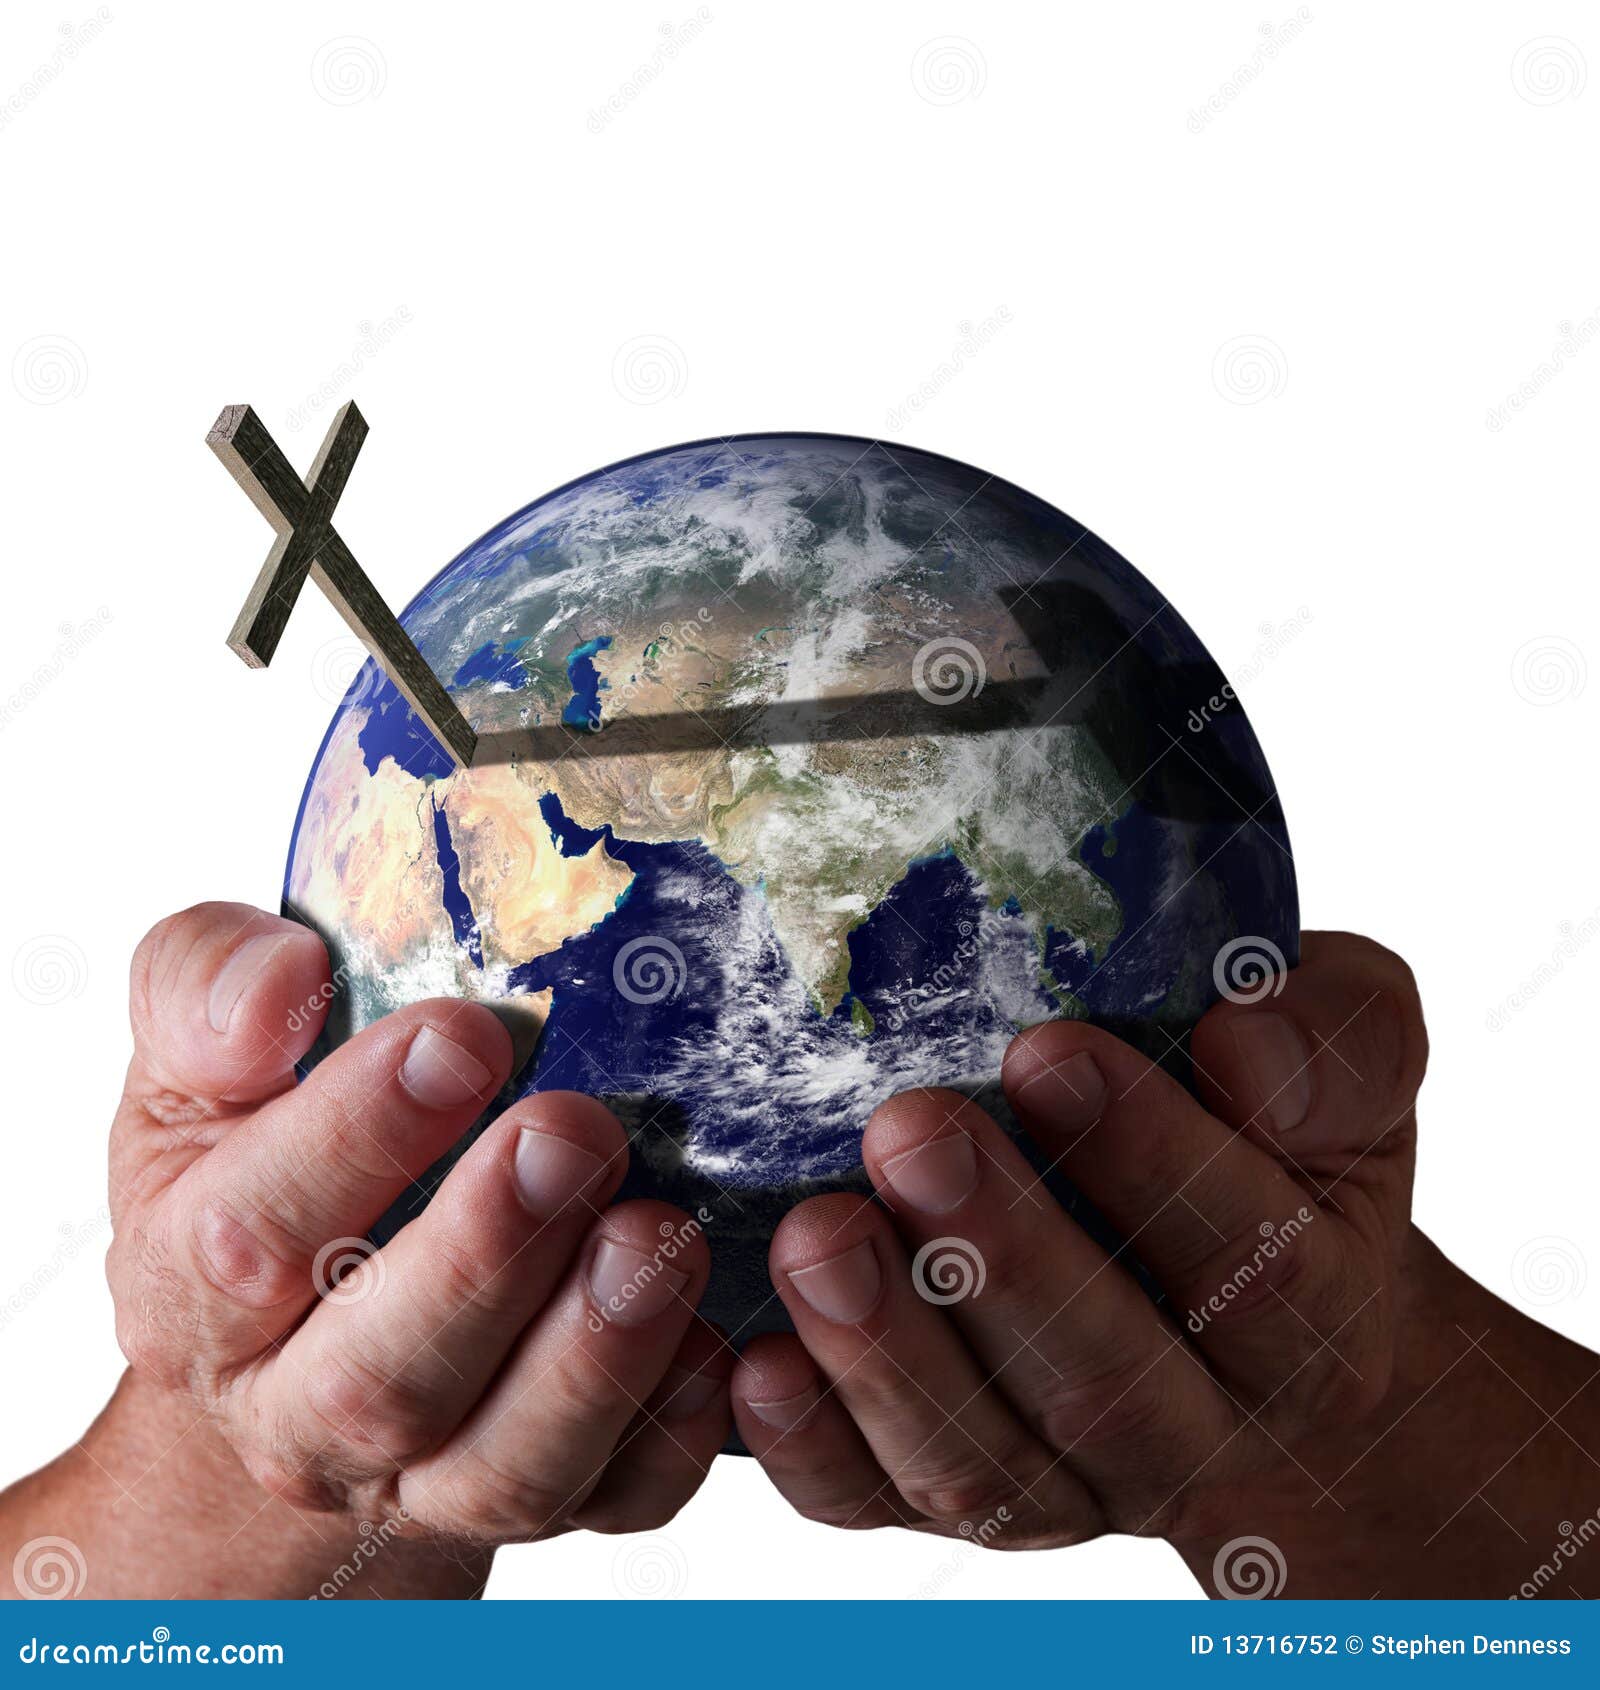 for god so loved the world. holding in his hands